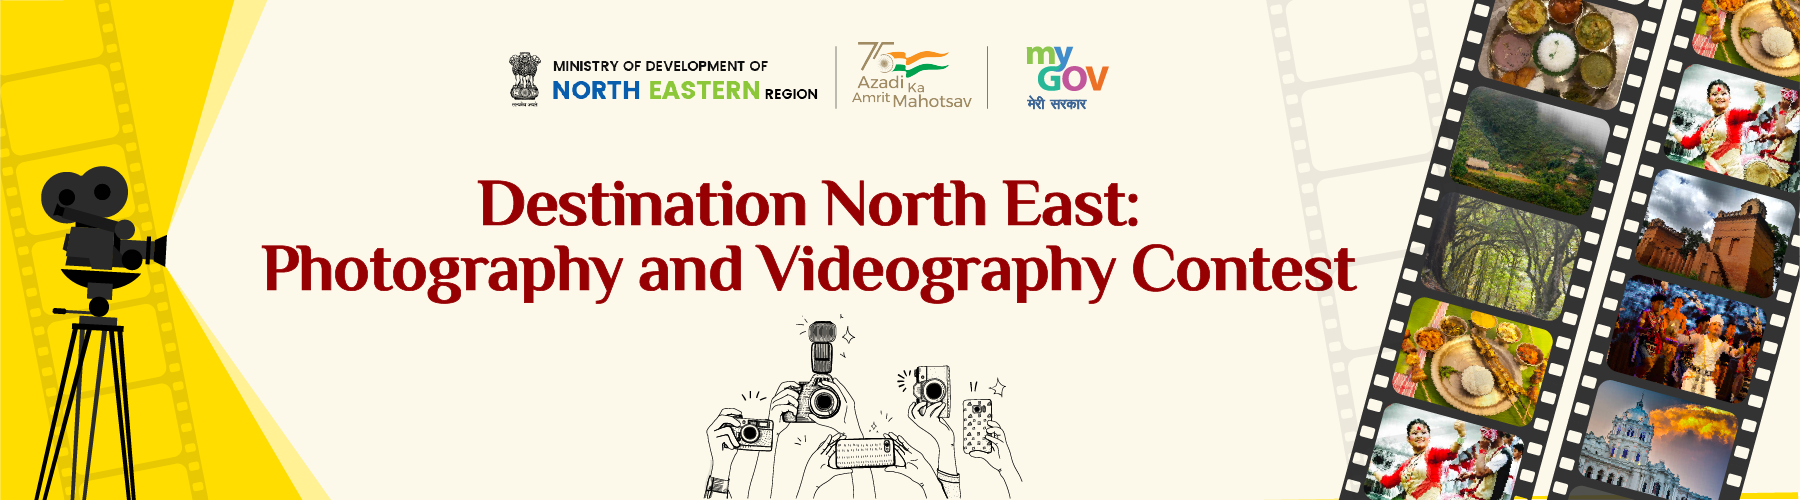 Destination North East: Photography and Videography Contest